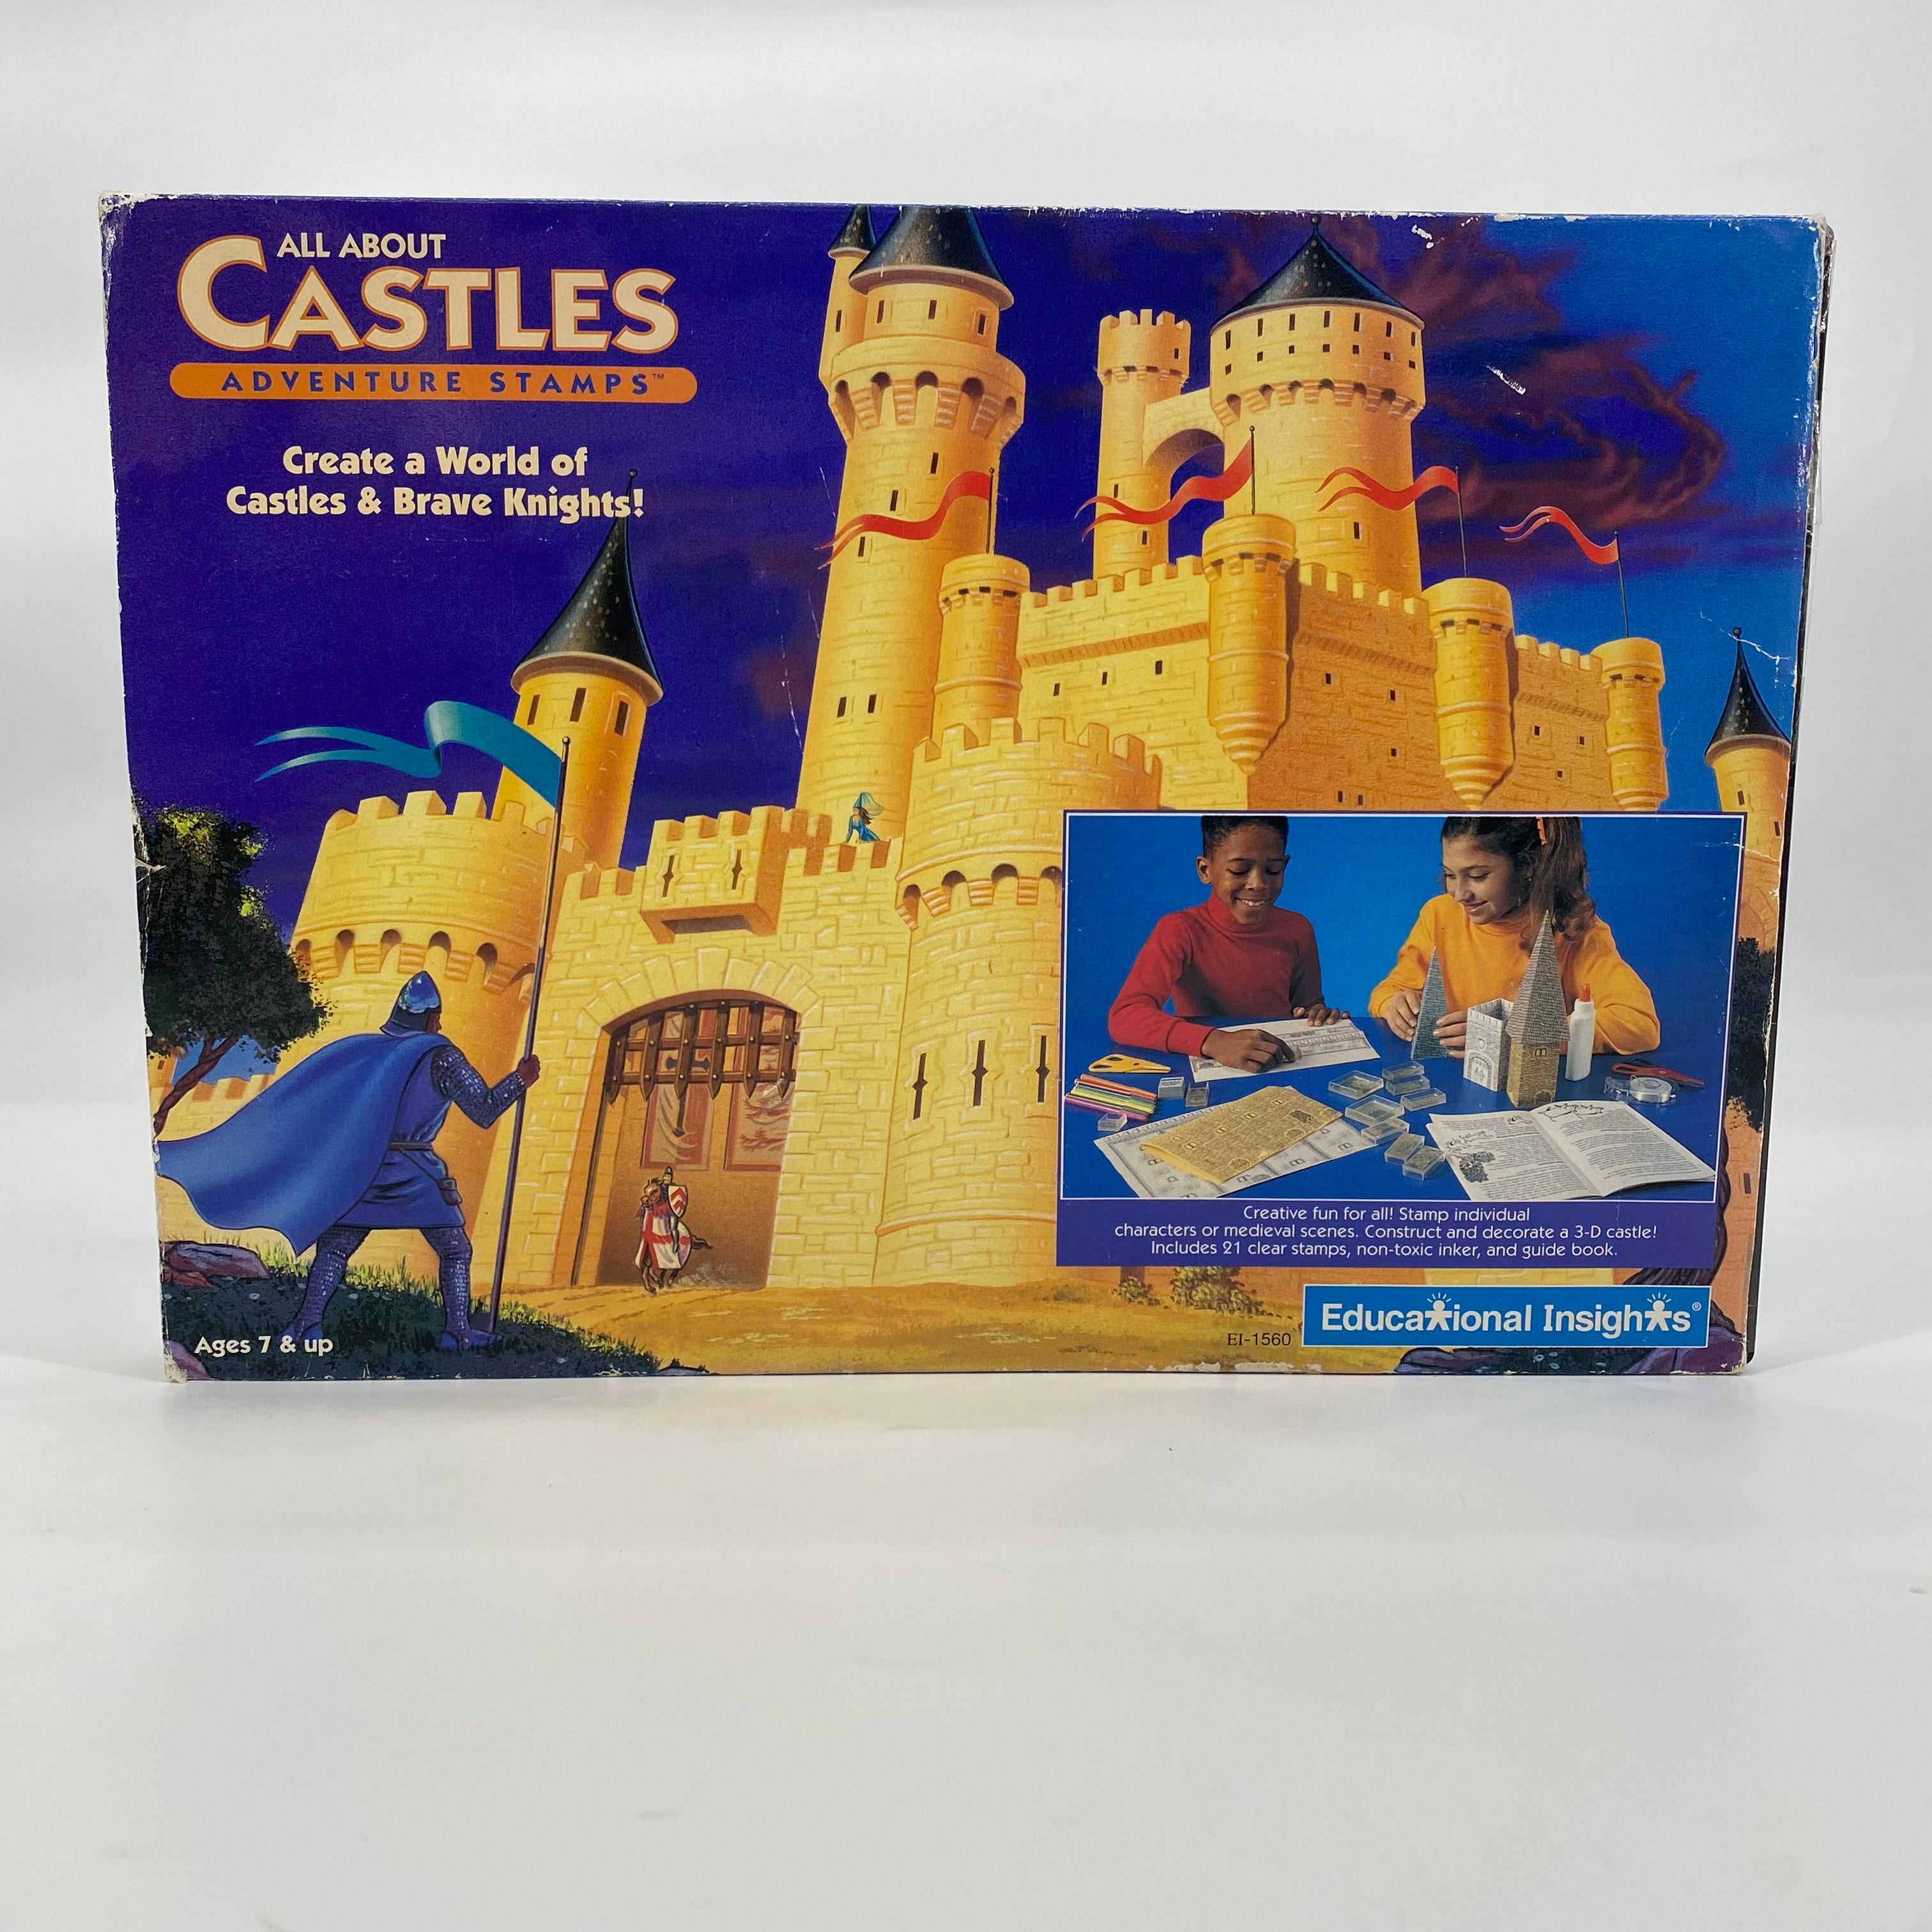 All about castles